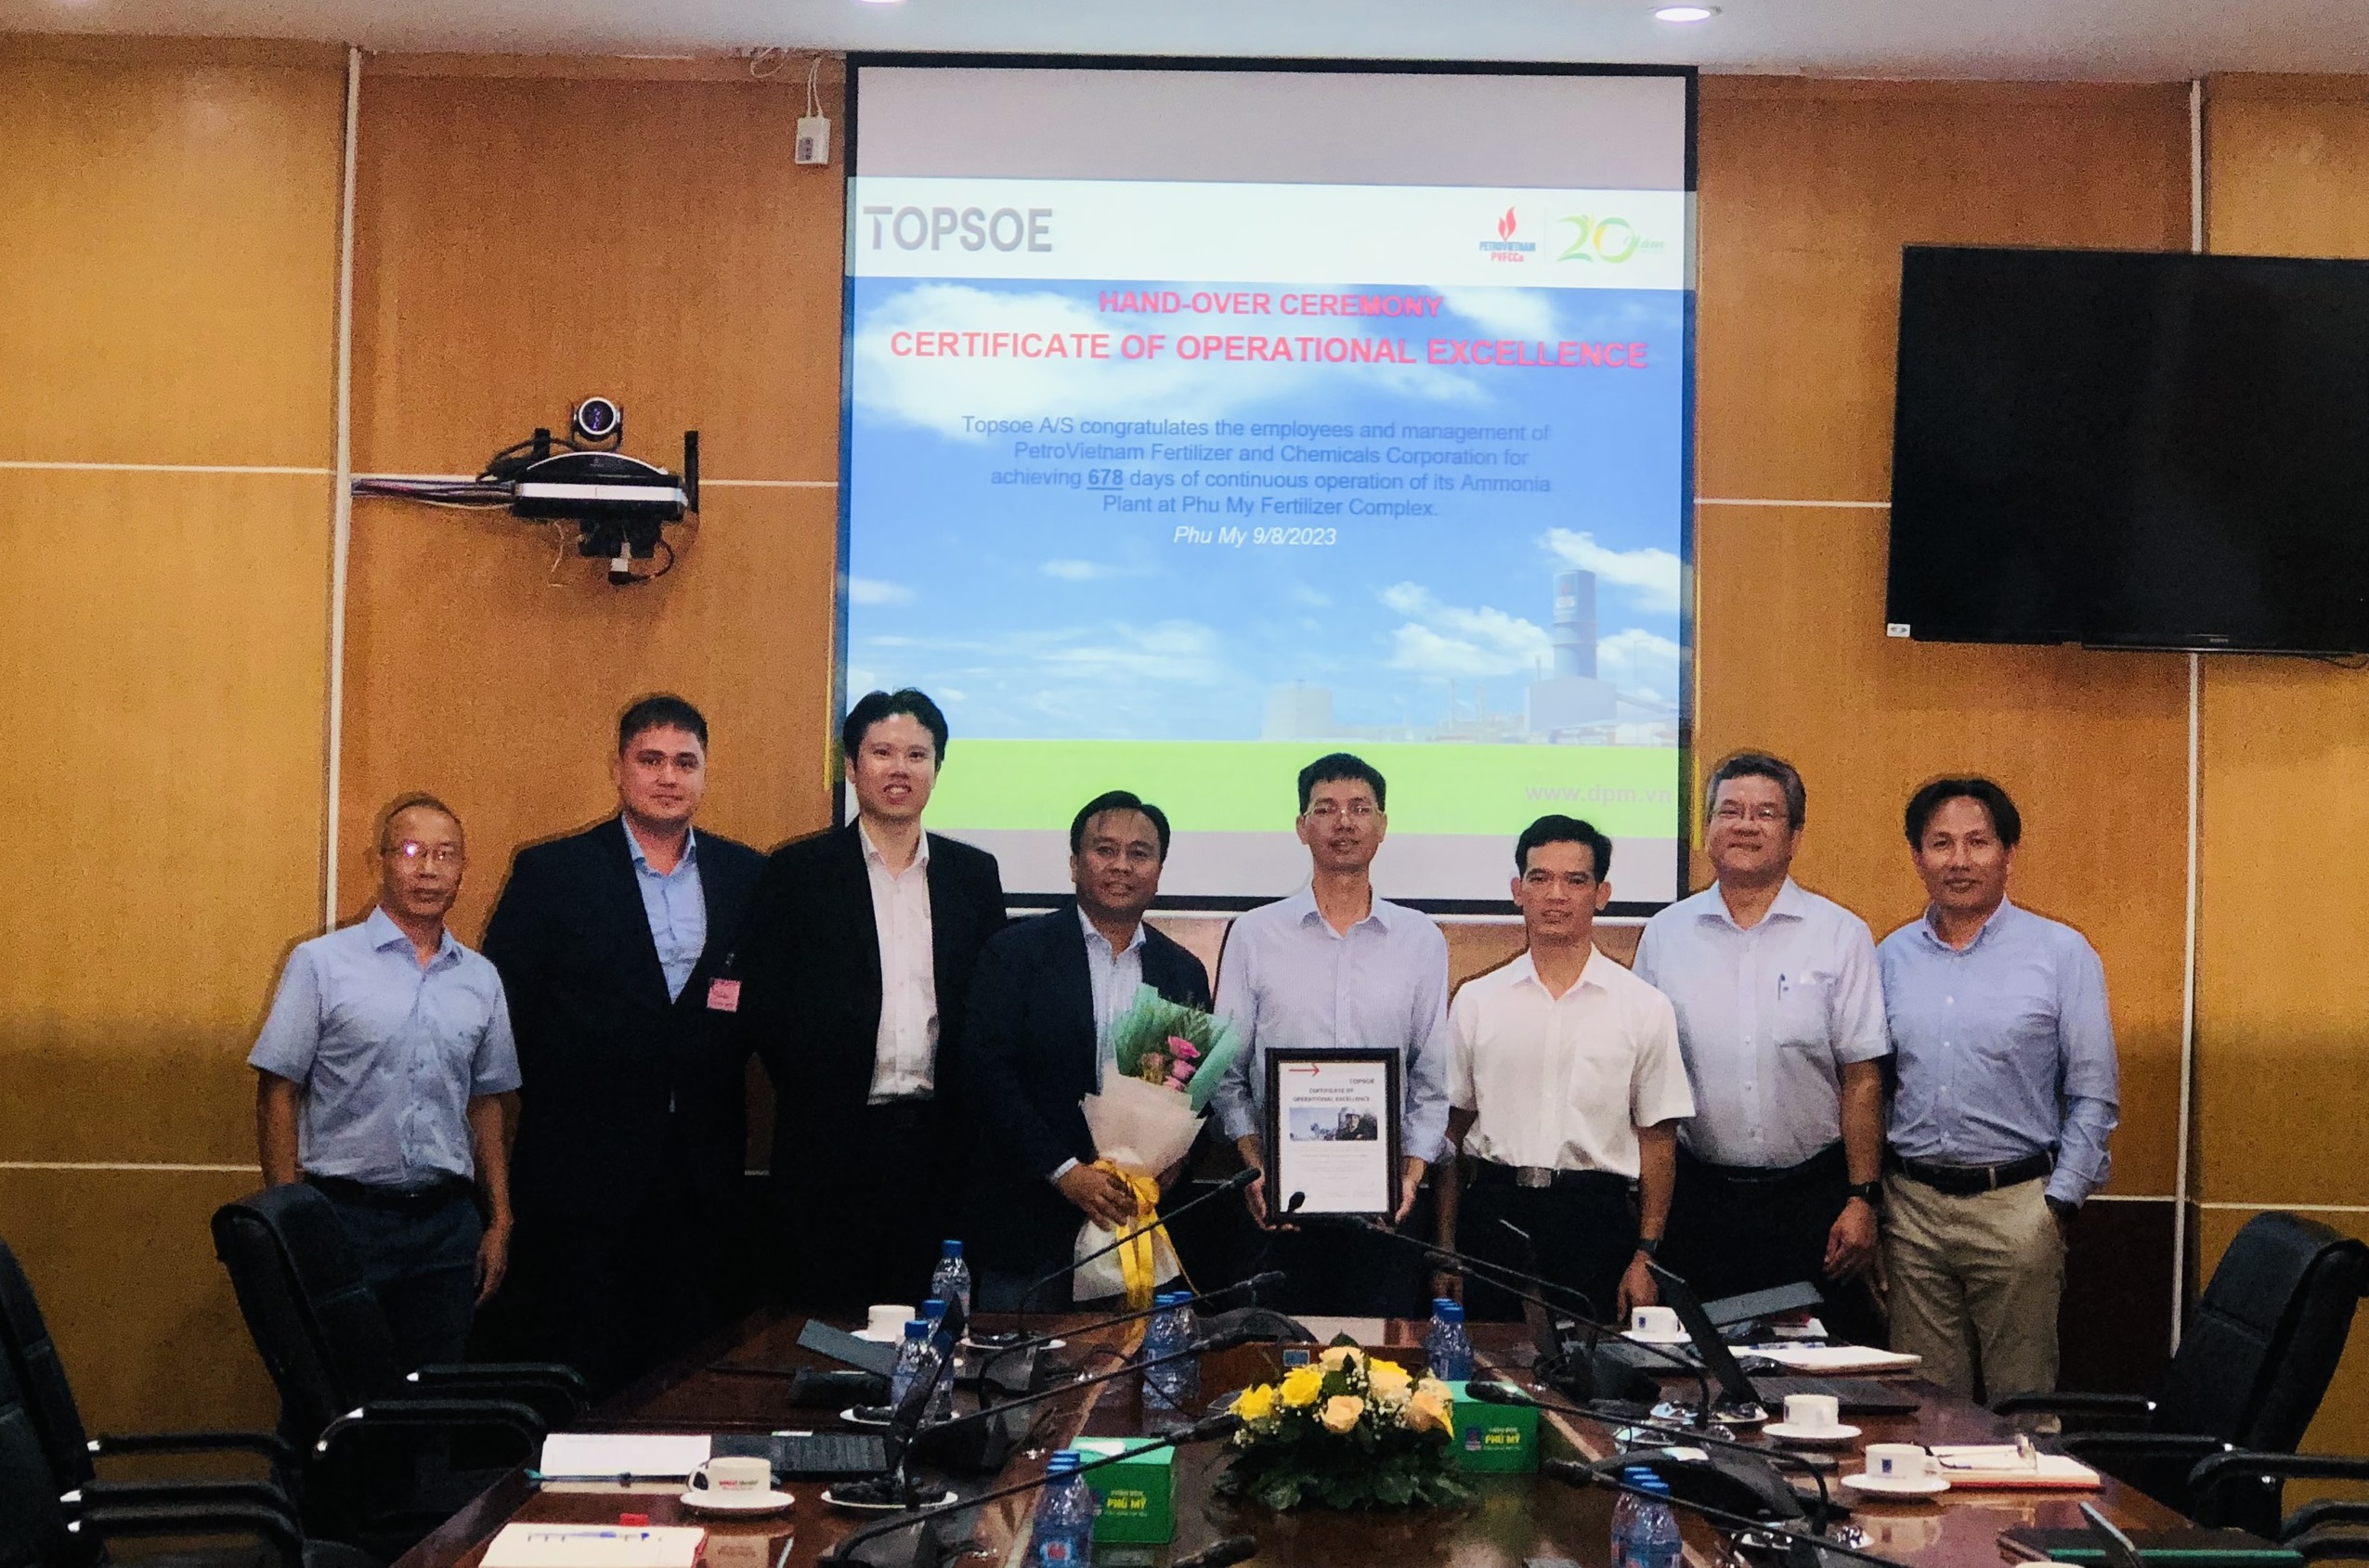 “Continuous operation of Ammonia Unit for 678 days and nights: Phu My Fertilizer Complex awarded Excellent Operation Certificate.”